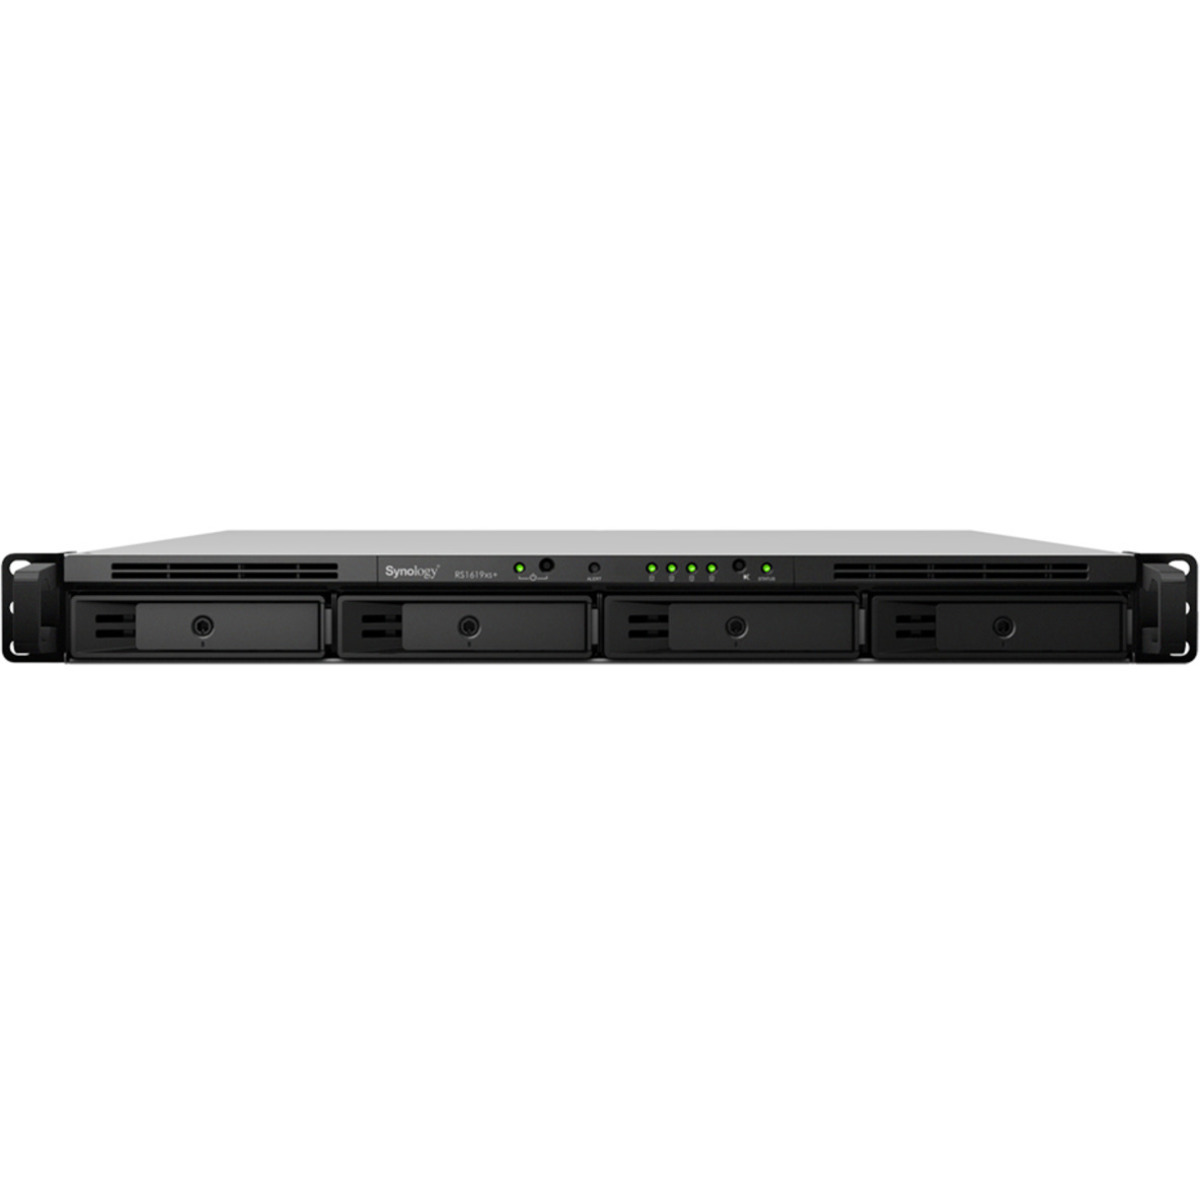 Synology RackStation RS1619xs+ 48tb 4-Bay RackMount Multimedia / Power User / Business NAS - Network Attached Storage Device 3x16tb Western Digital Gold WD161KRYZ 3.5 7200rpm SATA 6Gb/s HDD ENTERPRISE Class Drives Installed - Burn-In Tested RackStation RS1619xs+